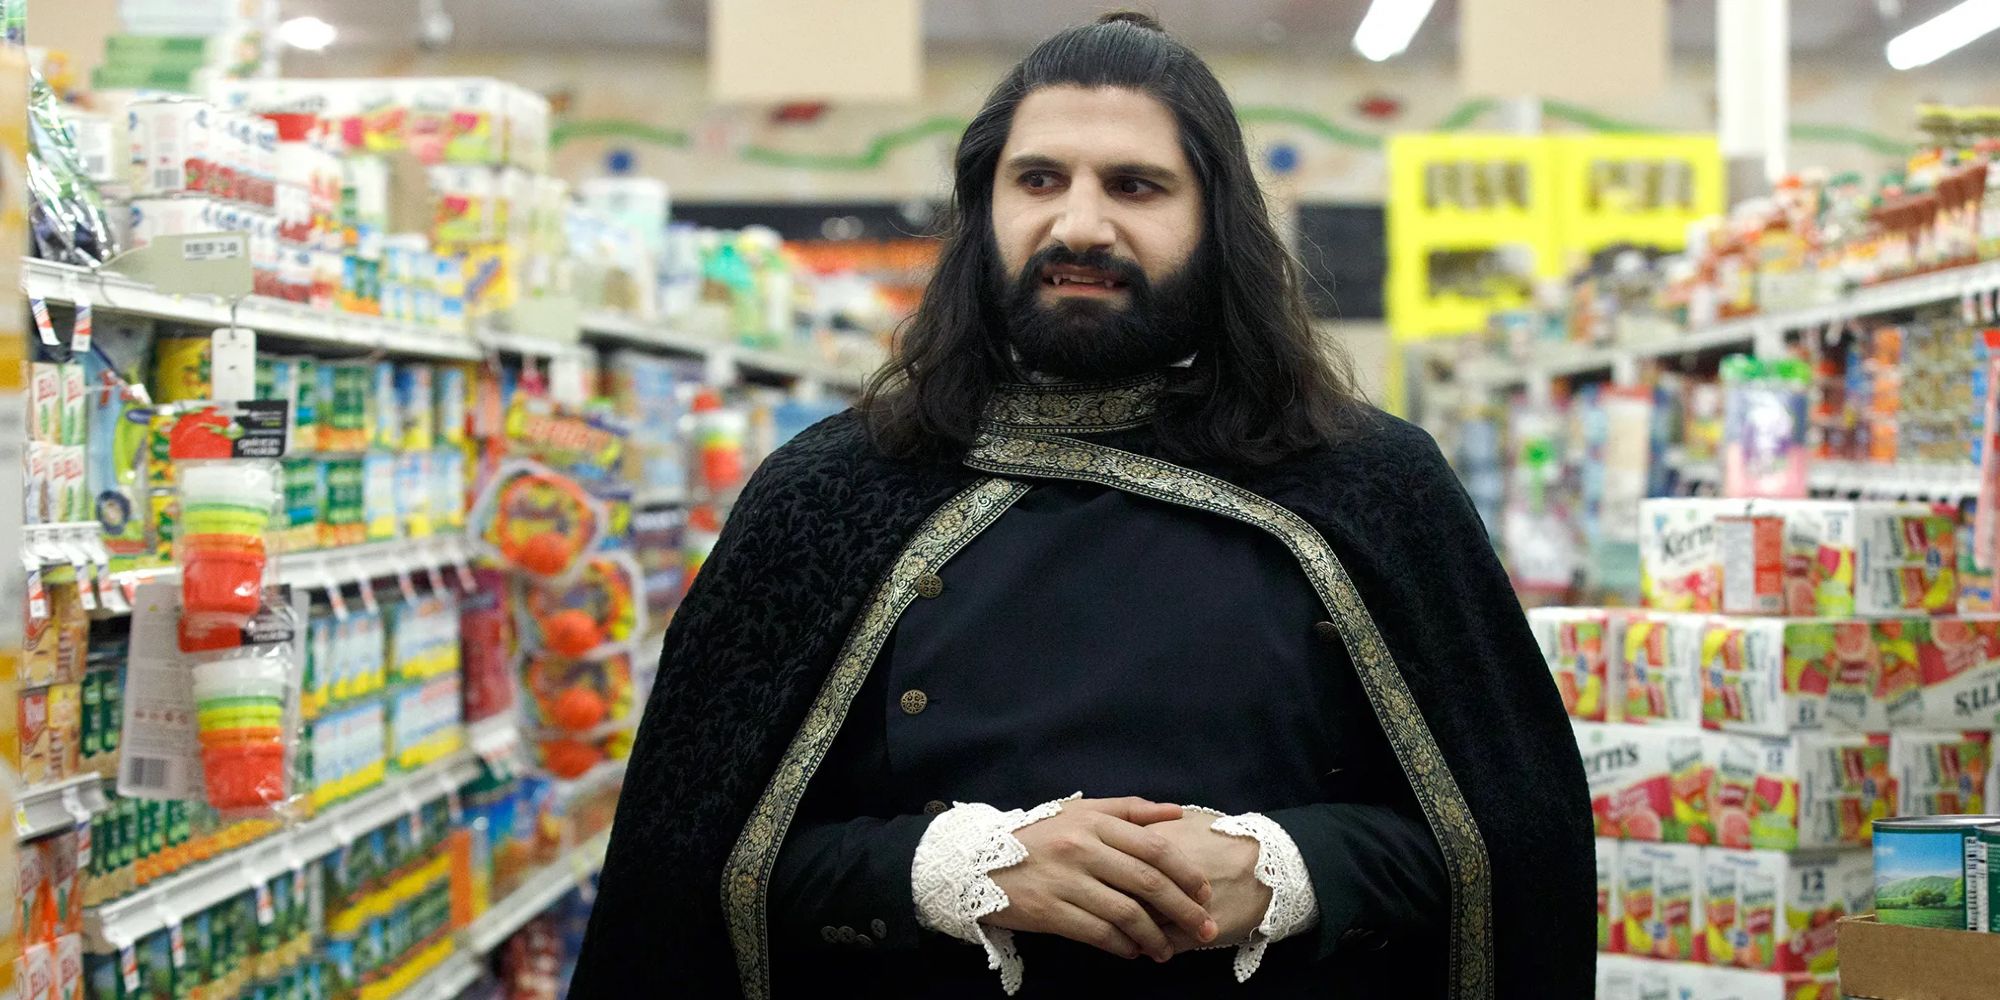 Nandor walks through a grocery store aisle in What We Do in the Shadows.